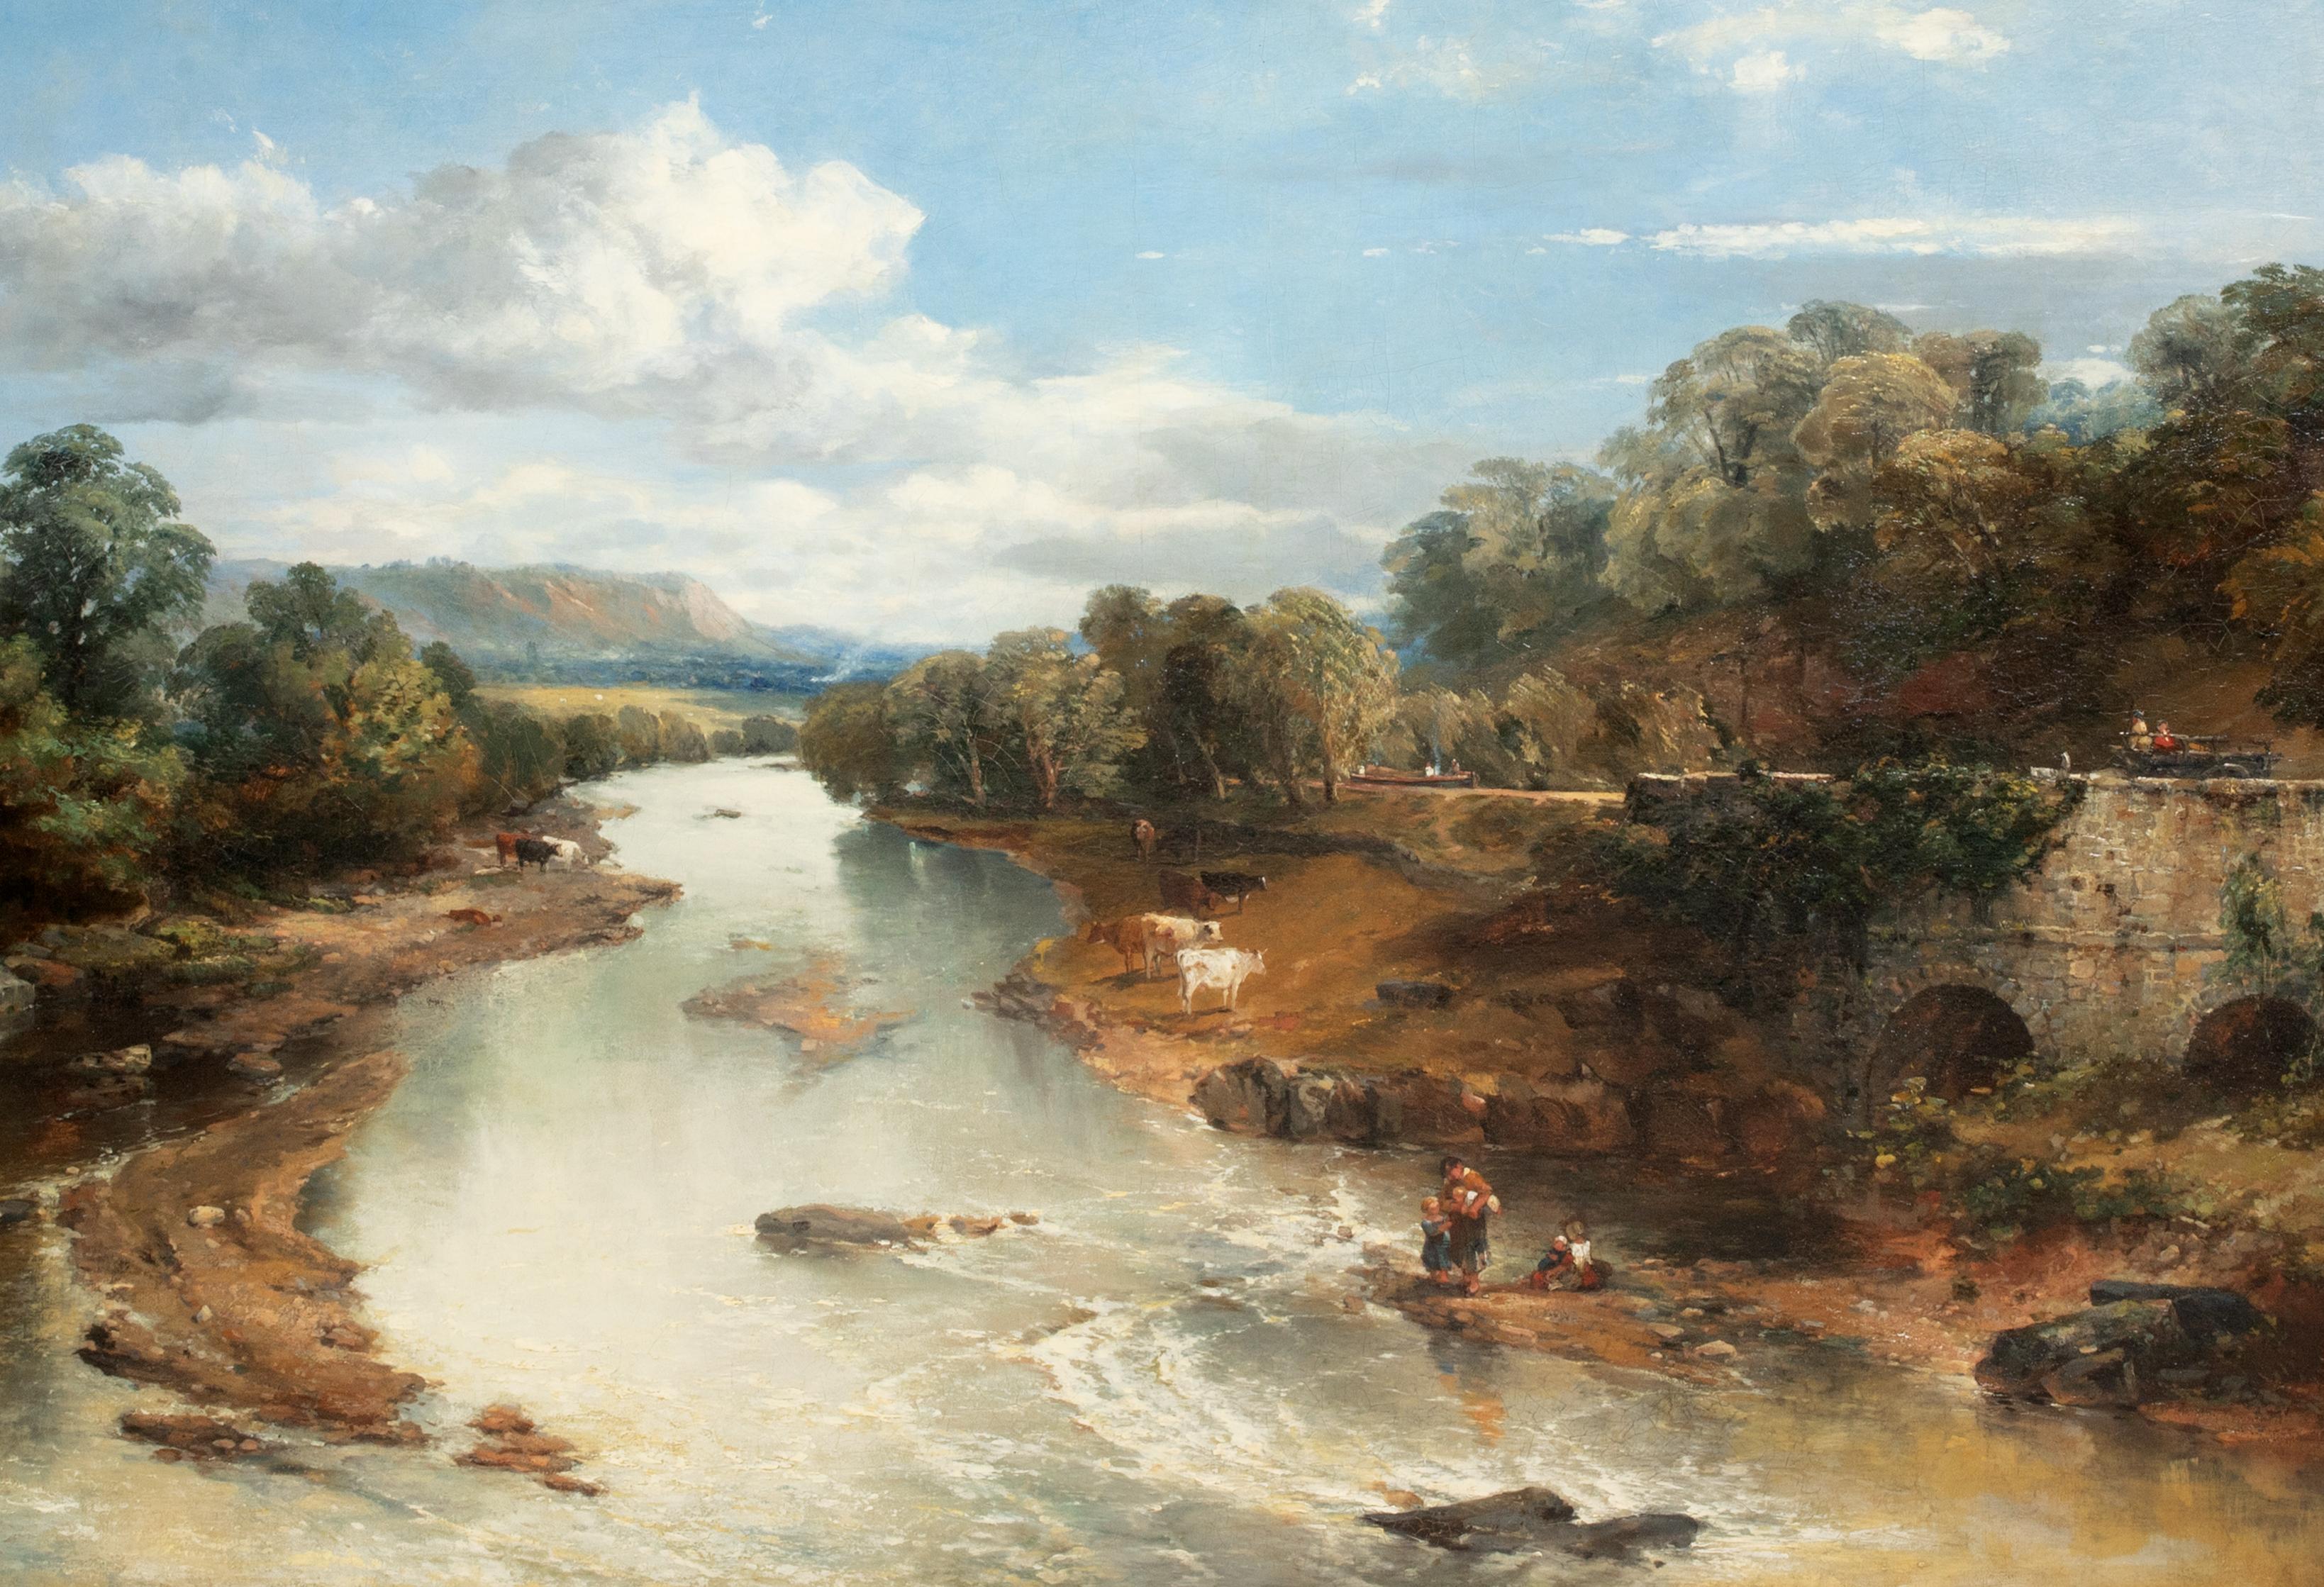  Fishing At The Four Arches, Bingley, Yorkshire, Joseph Clayton Bentley For Sale 2